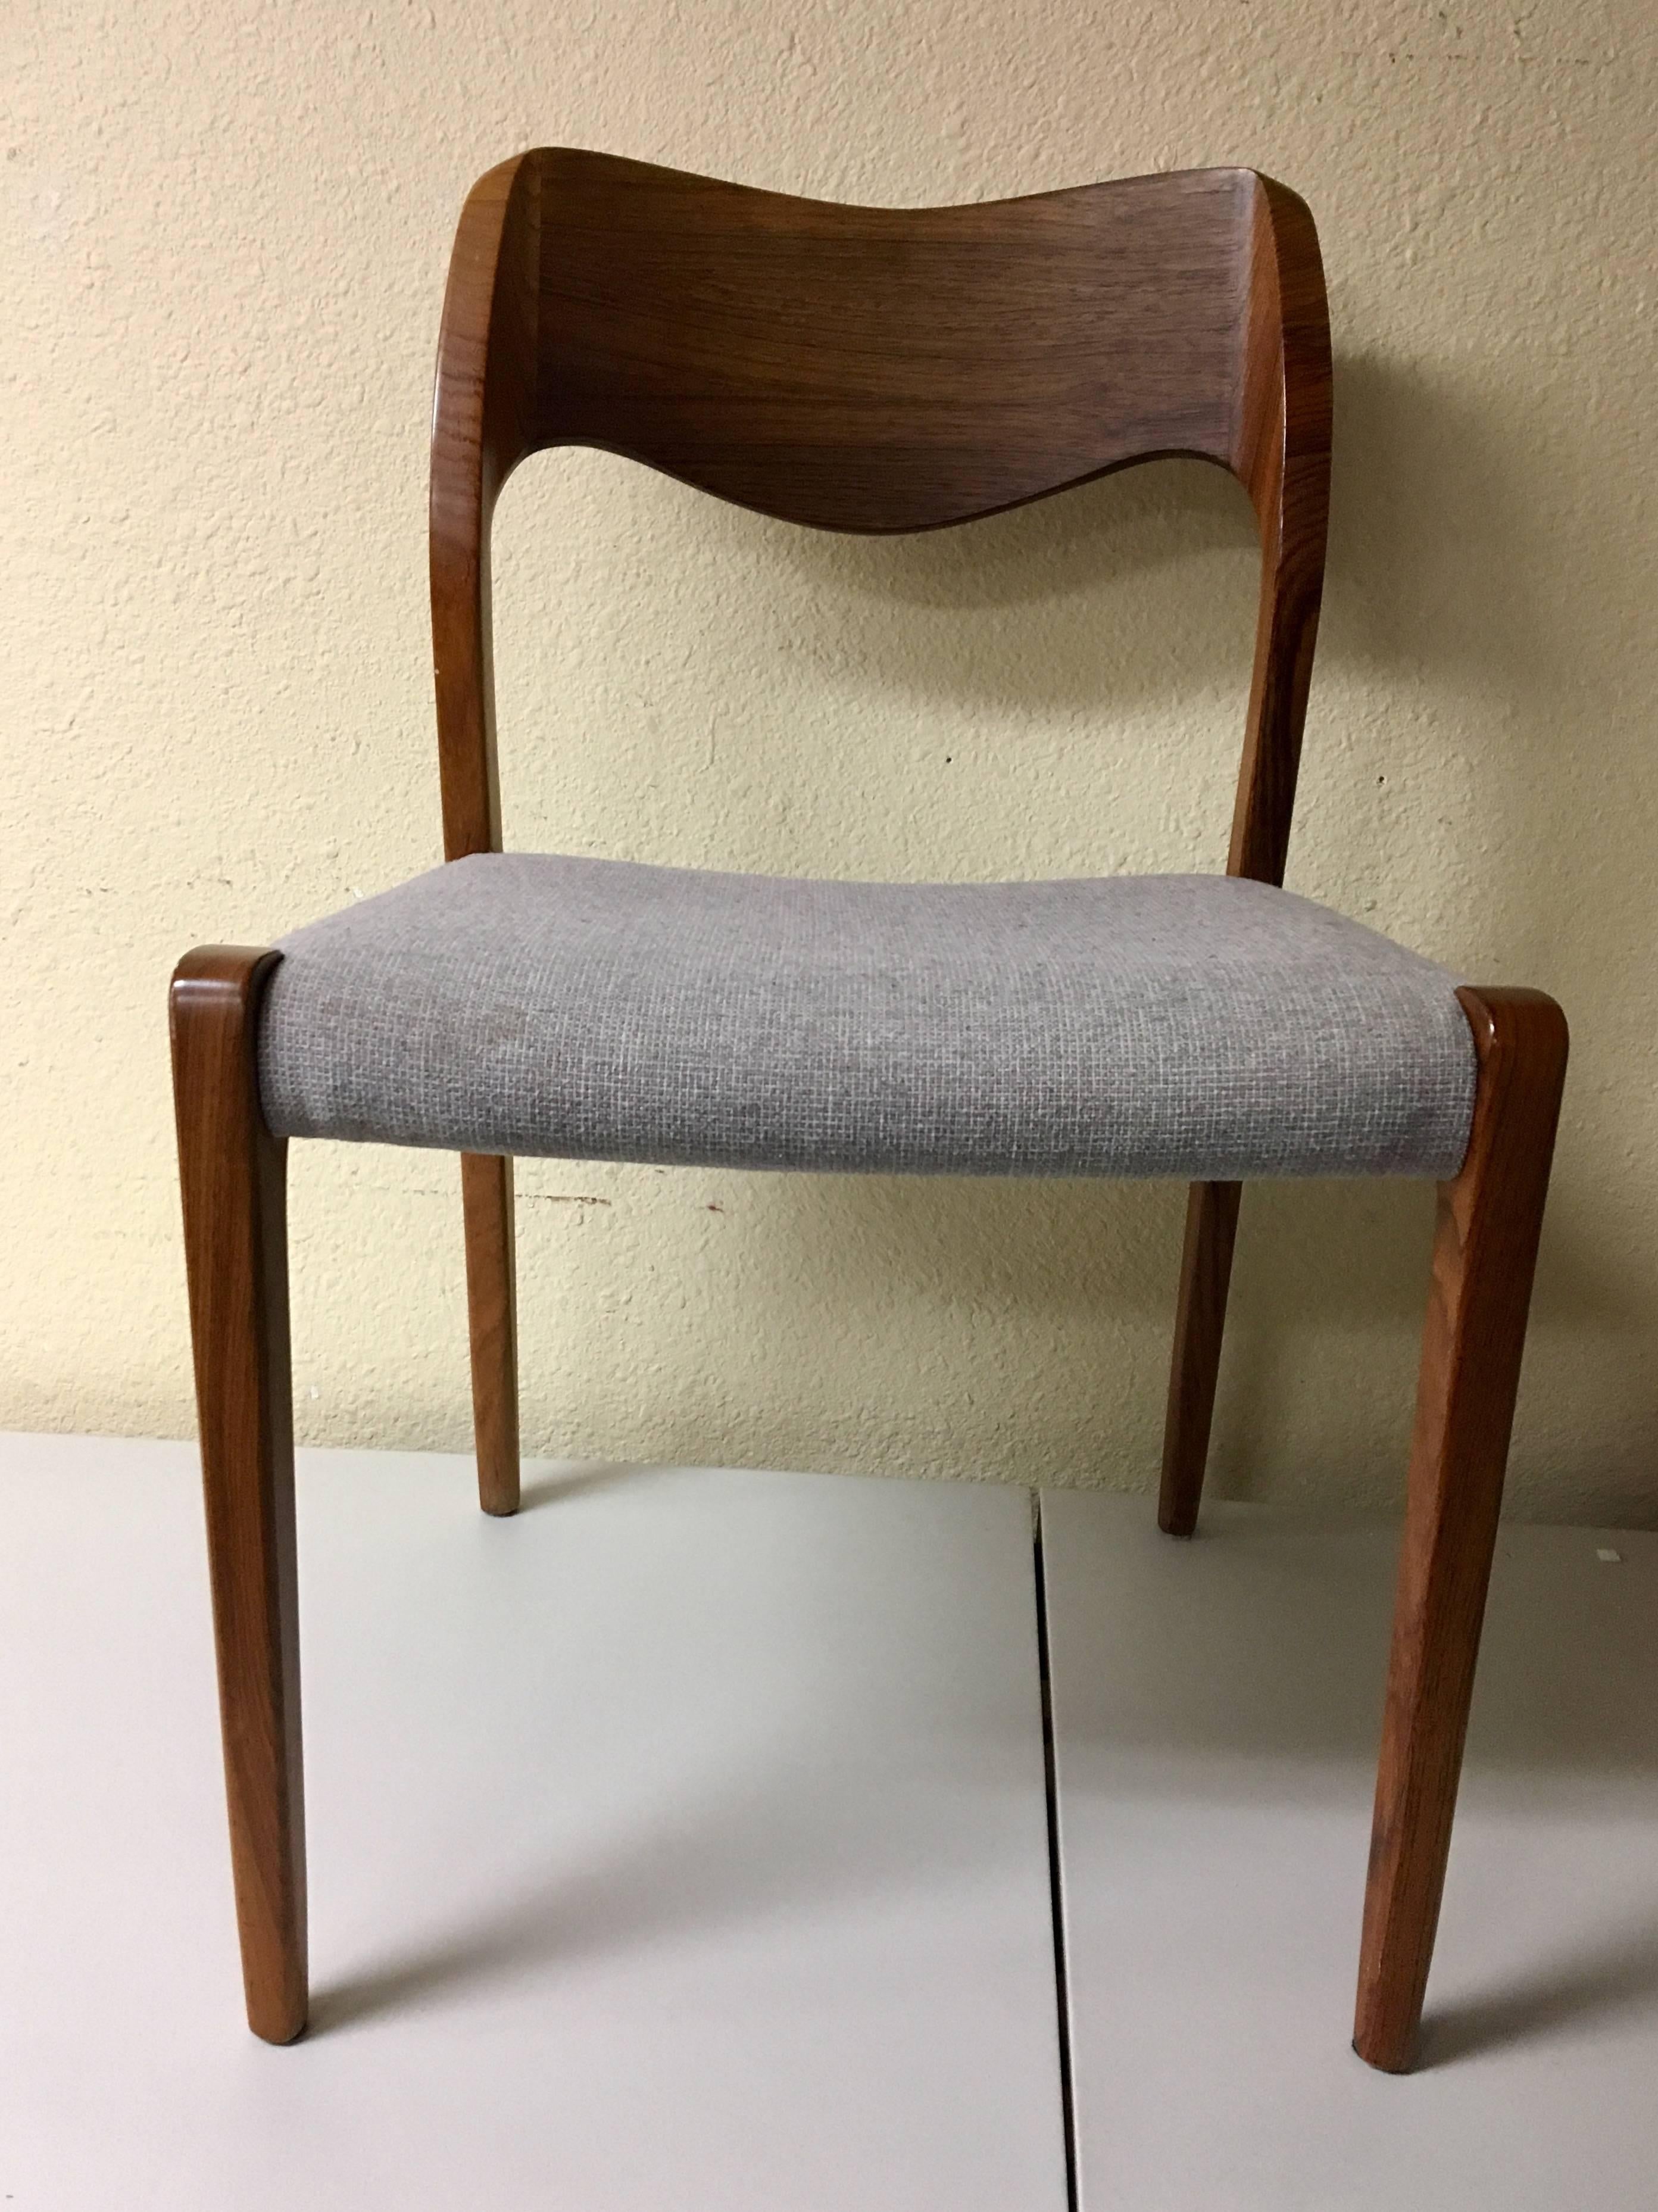 A very nice set of six rosewood dining chairs designed by Nils Moller, circa 1970s. The chairs are solid rosewood construction with light grey upholstered seats. The set is in very good condition; seats are lightly worn and show fading and light